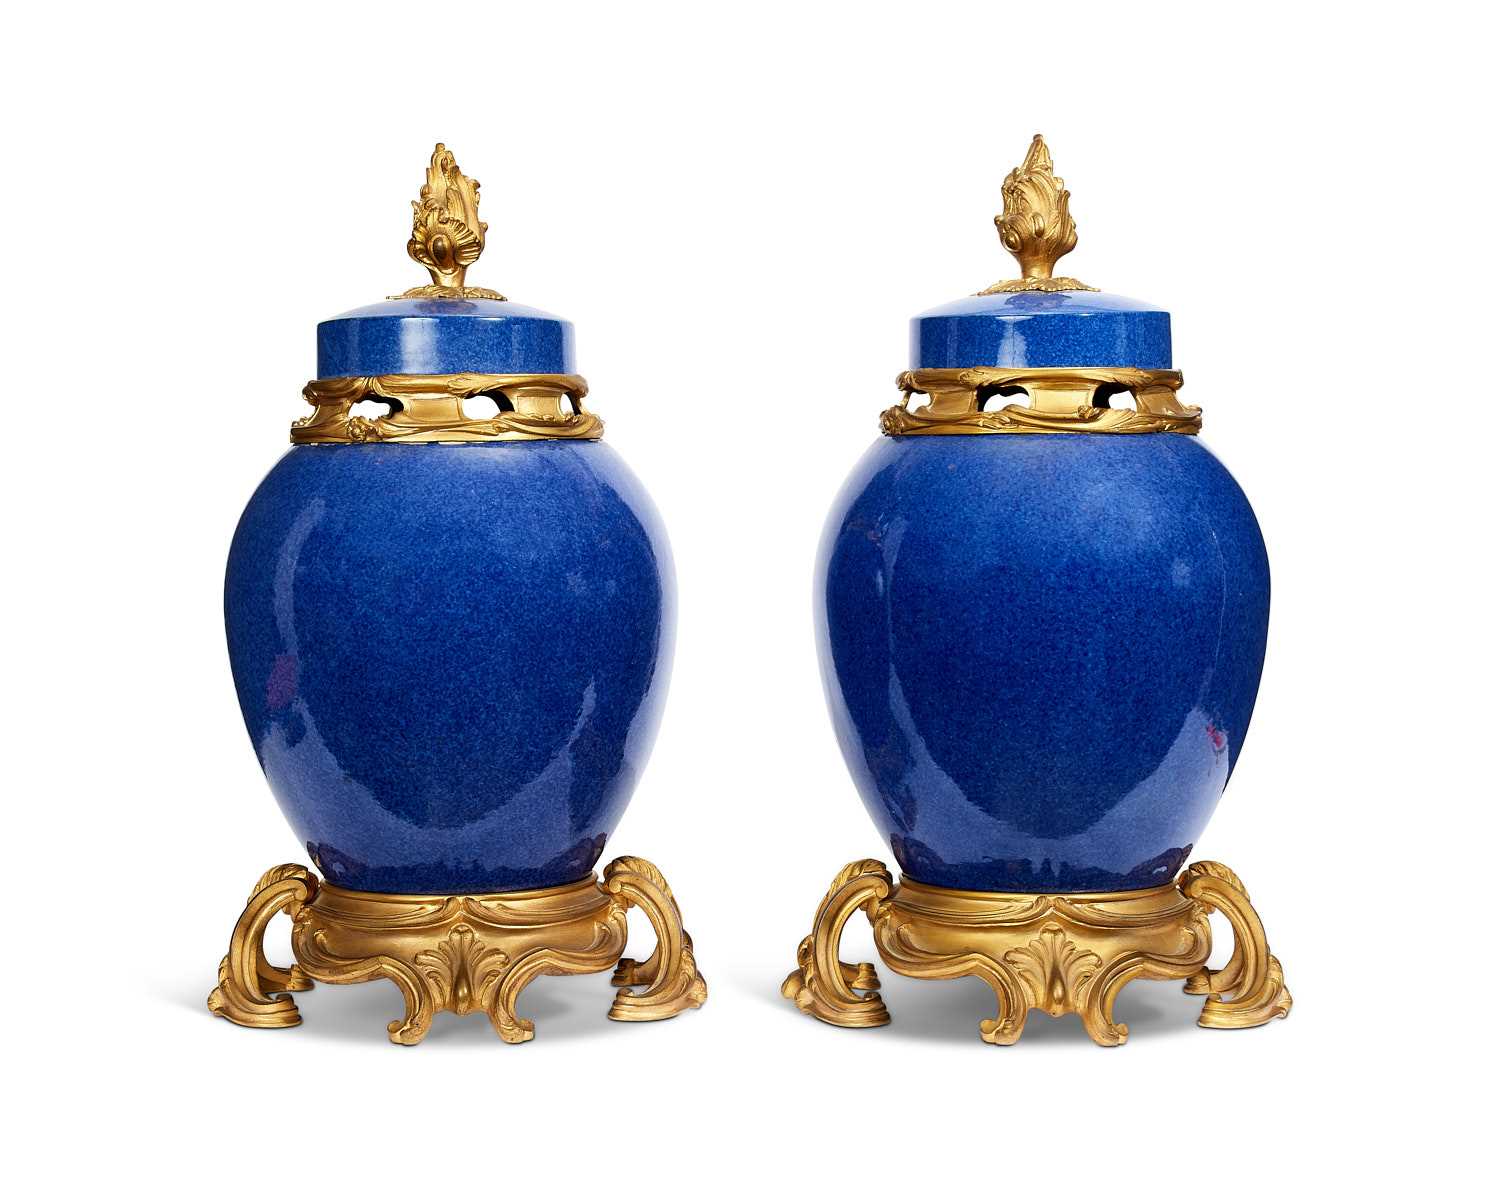 A PAIR OF LATE 19TH / EARLY 20TH CENTURY CHINESE PORCELAIN AND GILT BRONZE MOUNTED VASES